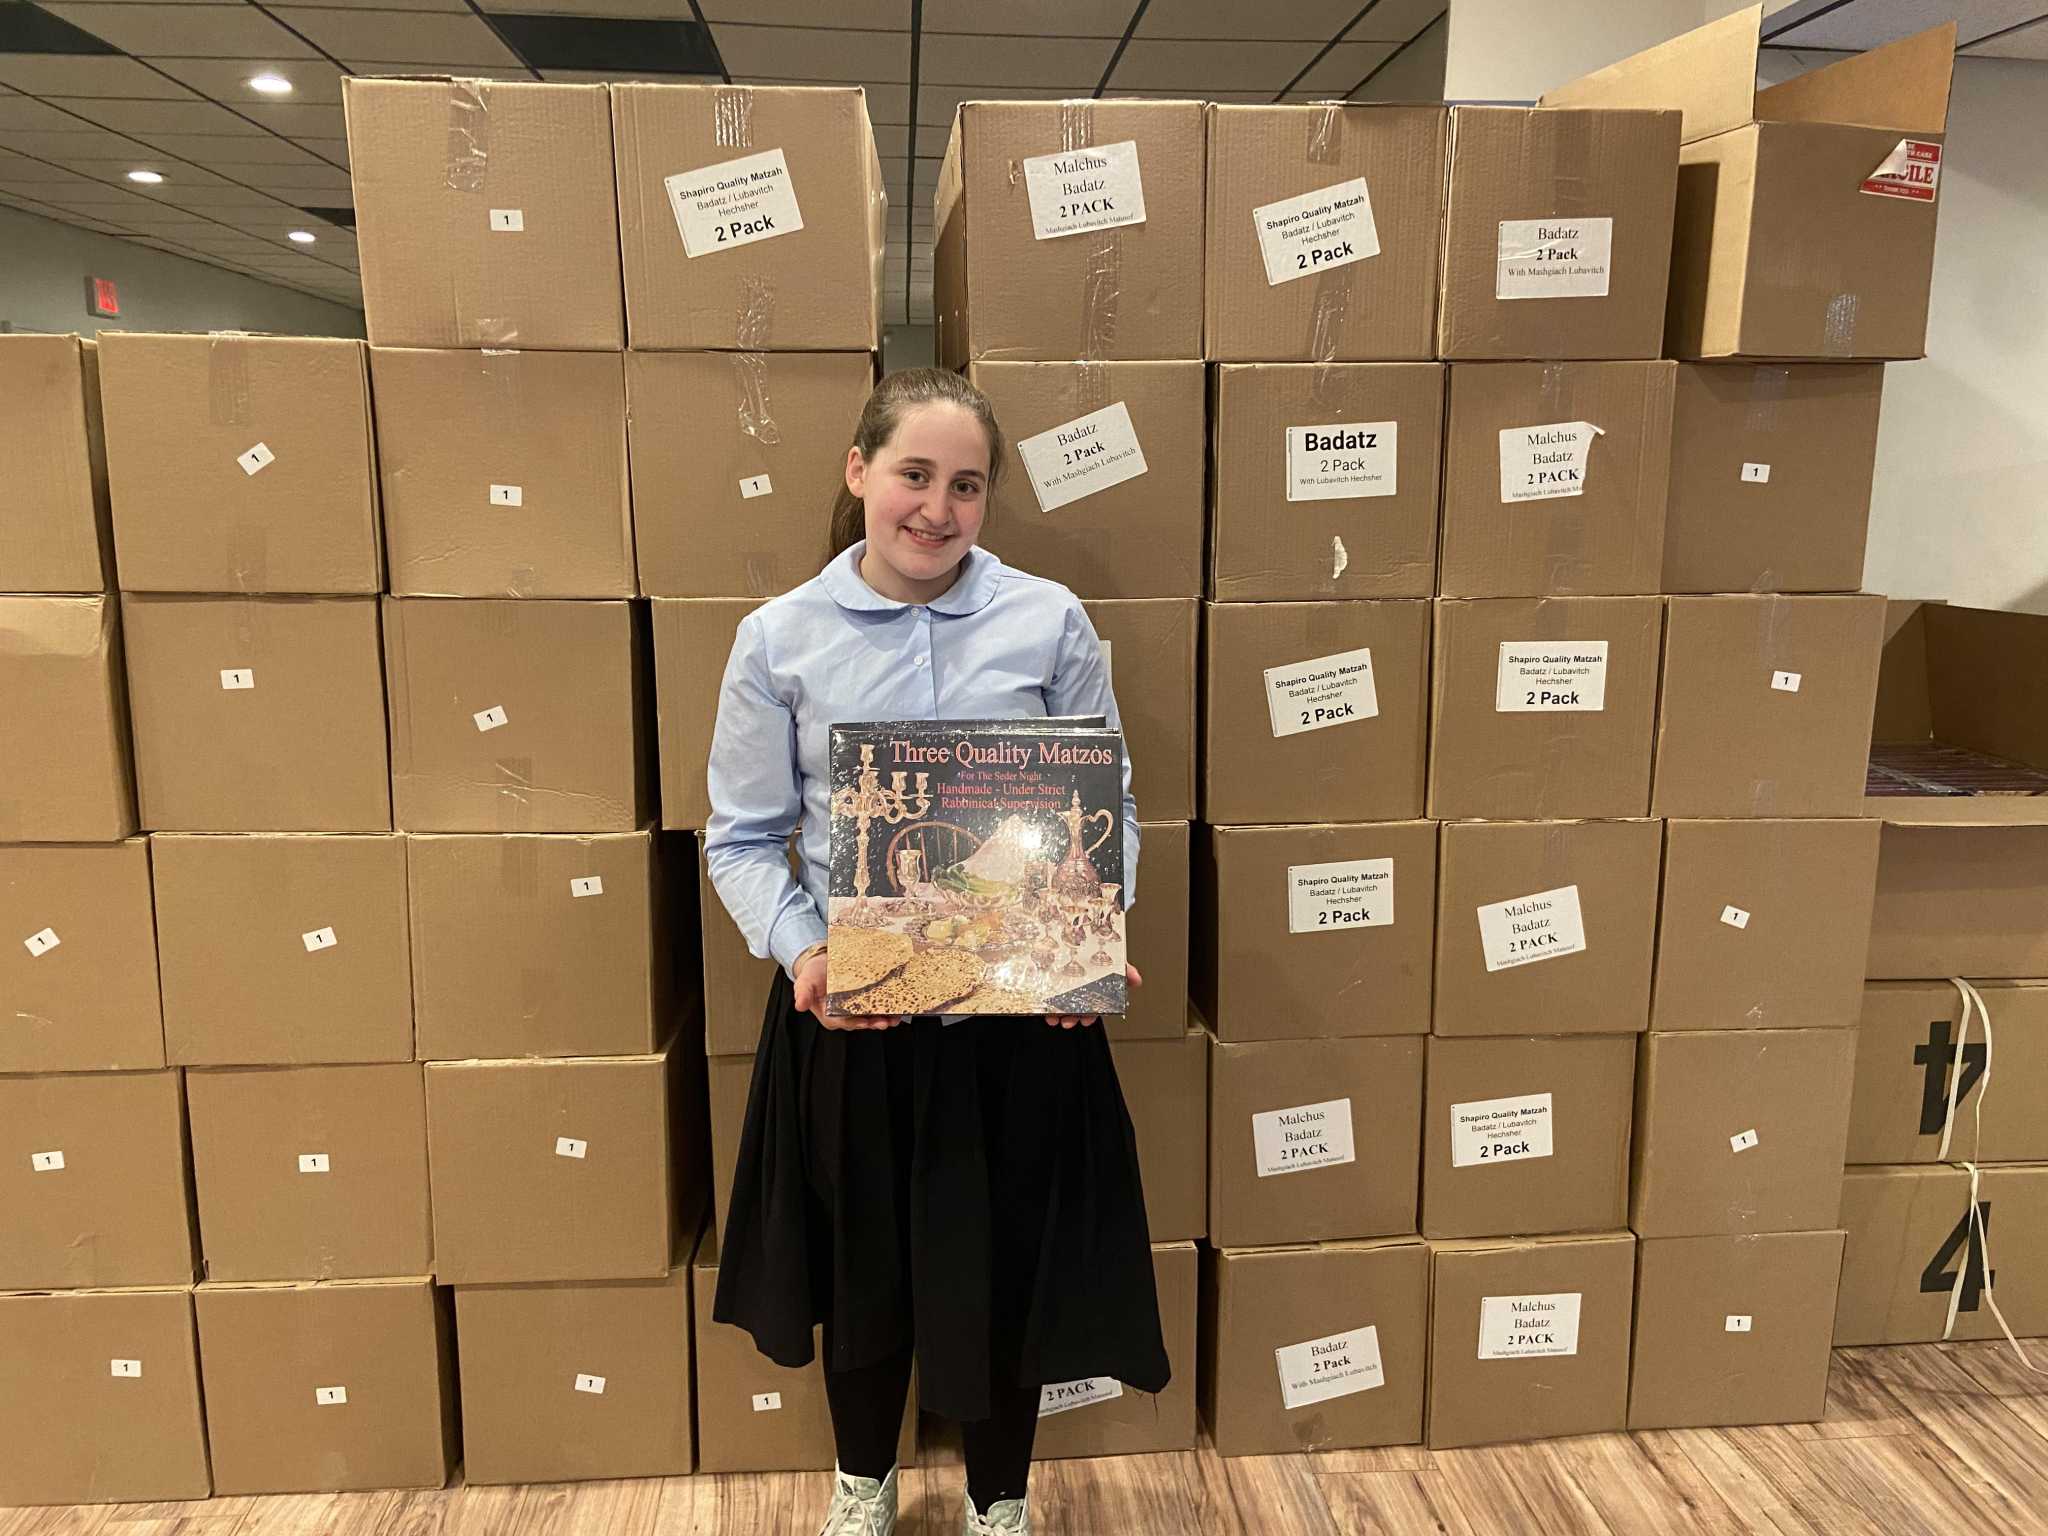 Fairfield rabbi to distribute 1,200 matzo packages for Passover